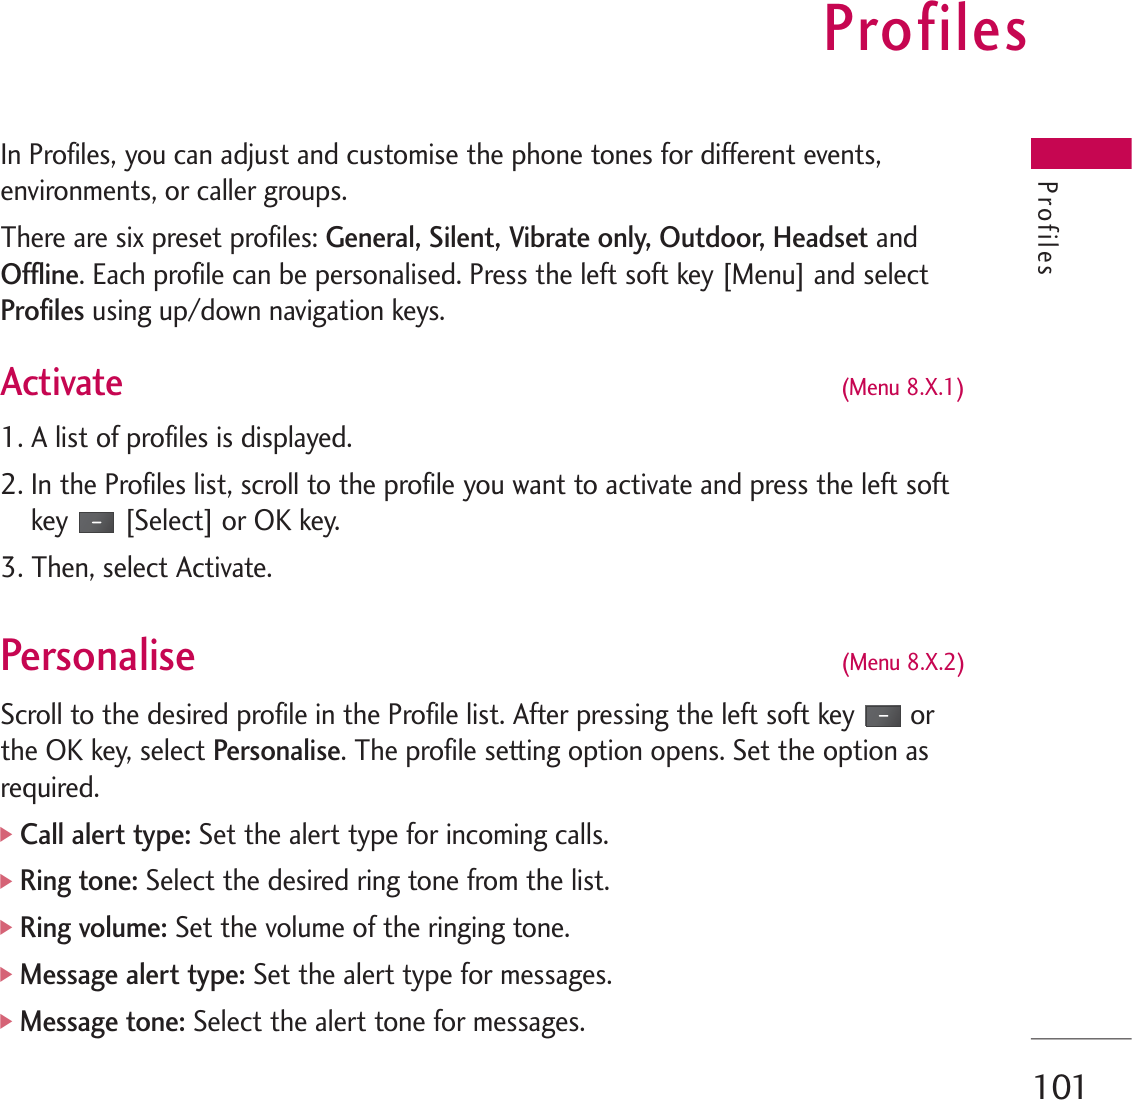 Profiles101In Profiles, you can adjust and customise the phone tones for different events,environments, or caller groups.There are six preset profiles: General, Silent, Vibrate only, Outdoor, Headset andOffline. Each profile can be personalised. Press the left soft key [Menu] and selectProfilesusing up/down navigation keys.Activate (Menu 8.X.1)1. A list of profiles is displayed.2. In the Profiles list, scroll to the profile you want to activate and press the left softkey [Select] or OK key.3. Then, select Activate.Personalise (Menu 8.X.2)Scroll to the desired profile in the Profile list. After pressing the left soft key orthe OK key, select Personalise. The profile setting option opens. Set the option asrequired.]Call alert type: Set the alert type for incoming calls.]Ring tone: Select the desired ring tone from the list.]Ring volume: Set the volume of the ringing tone.]Message alert type:Set the alert type for messages.]Message tone: Select the alert tone for messages.Profiles